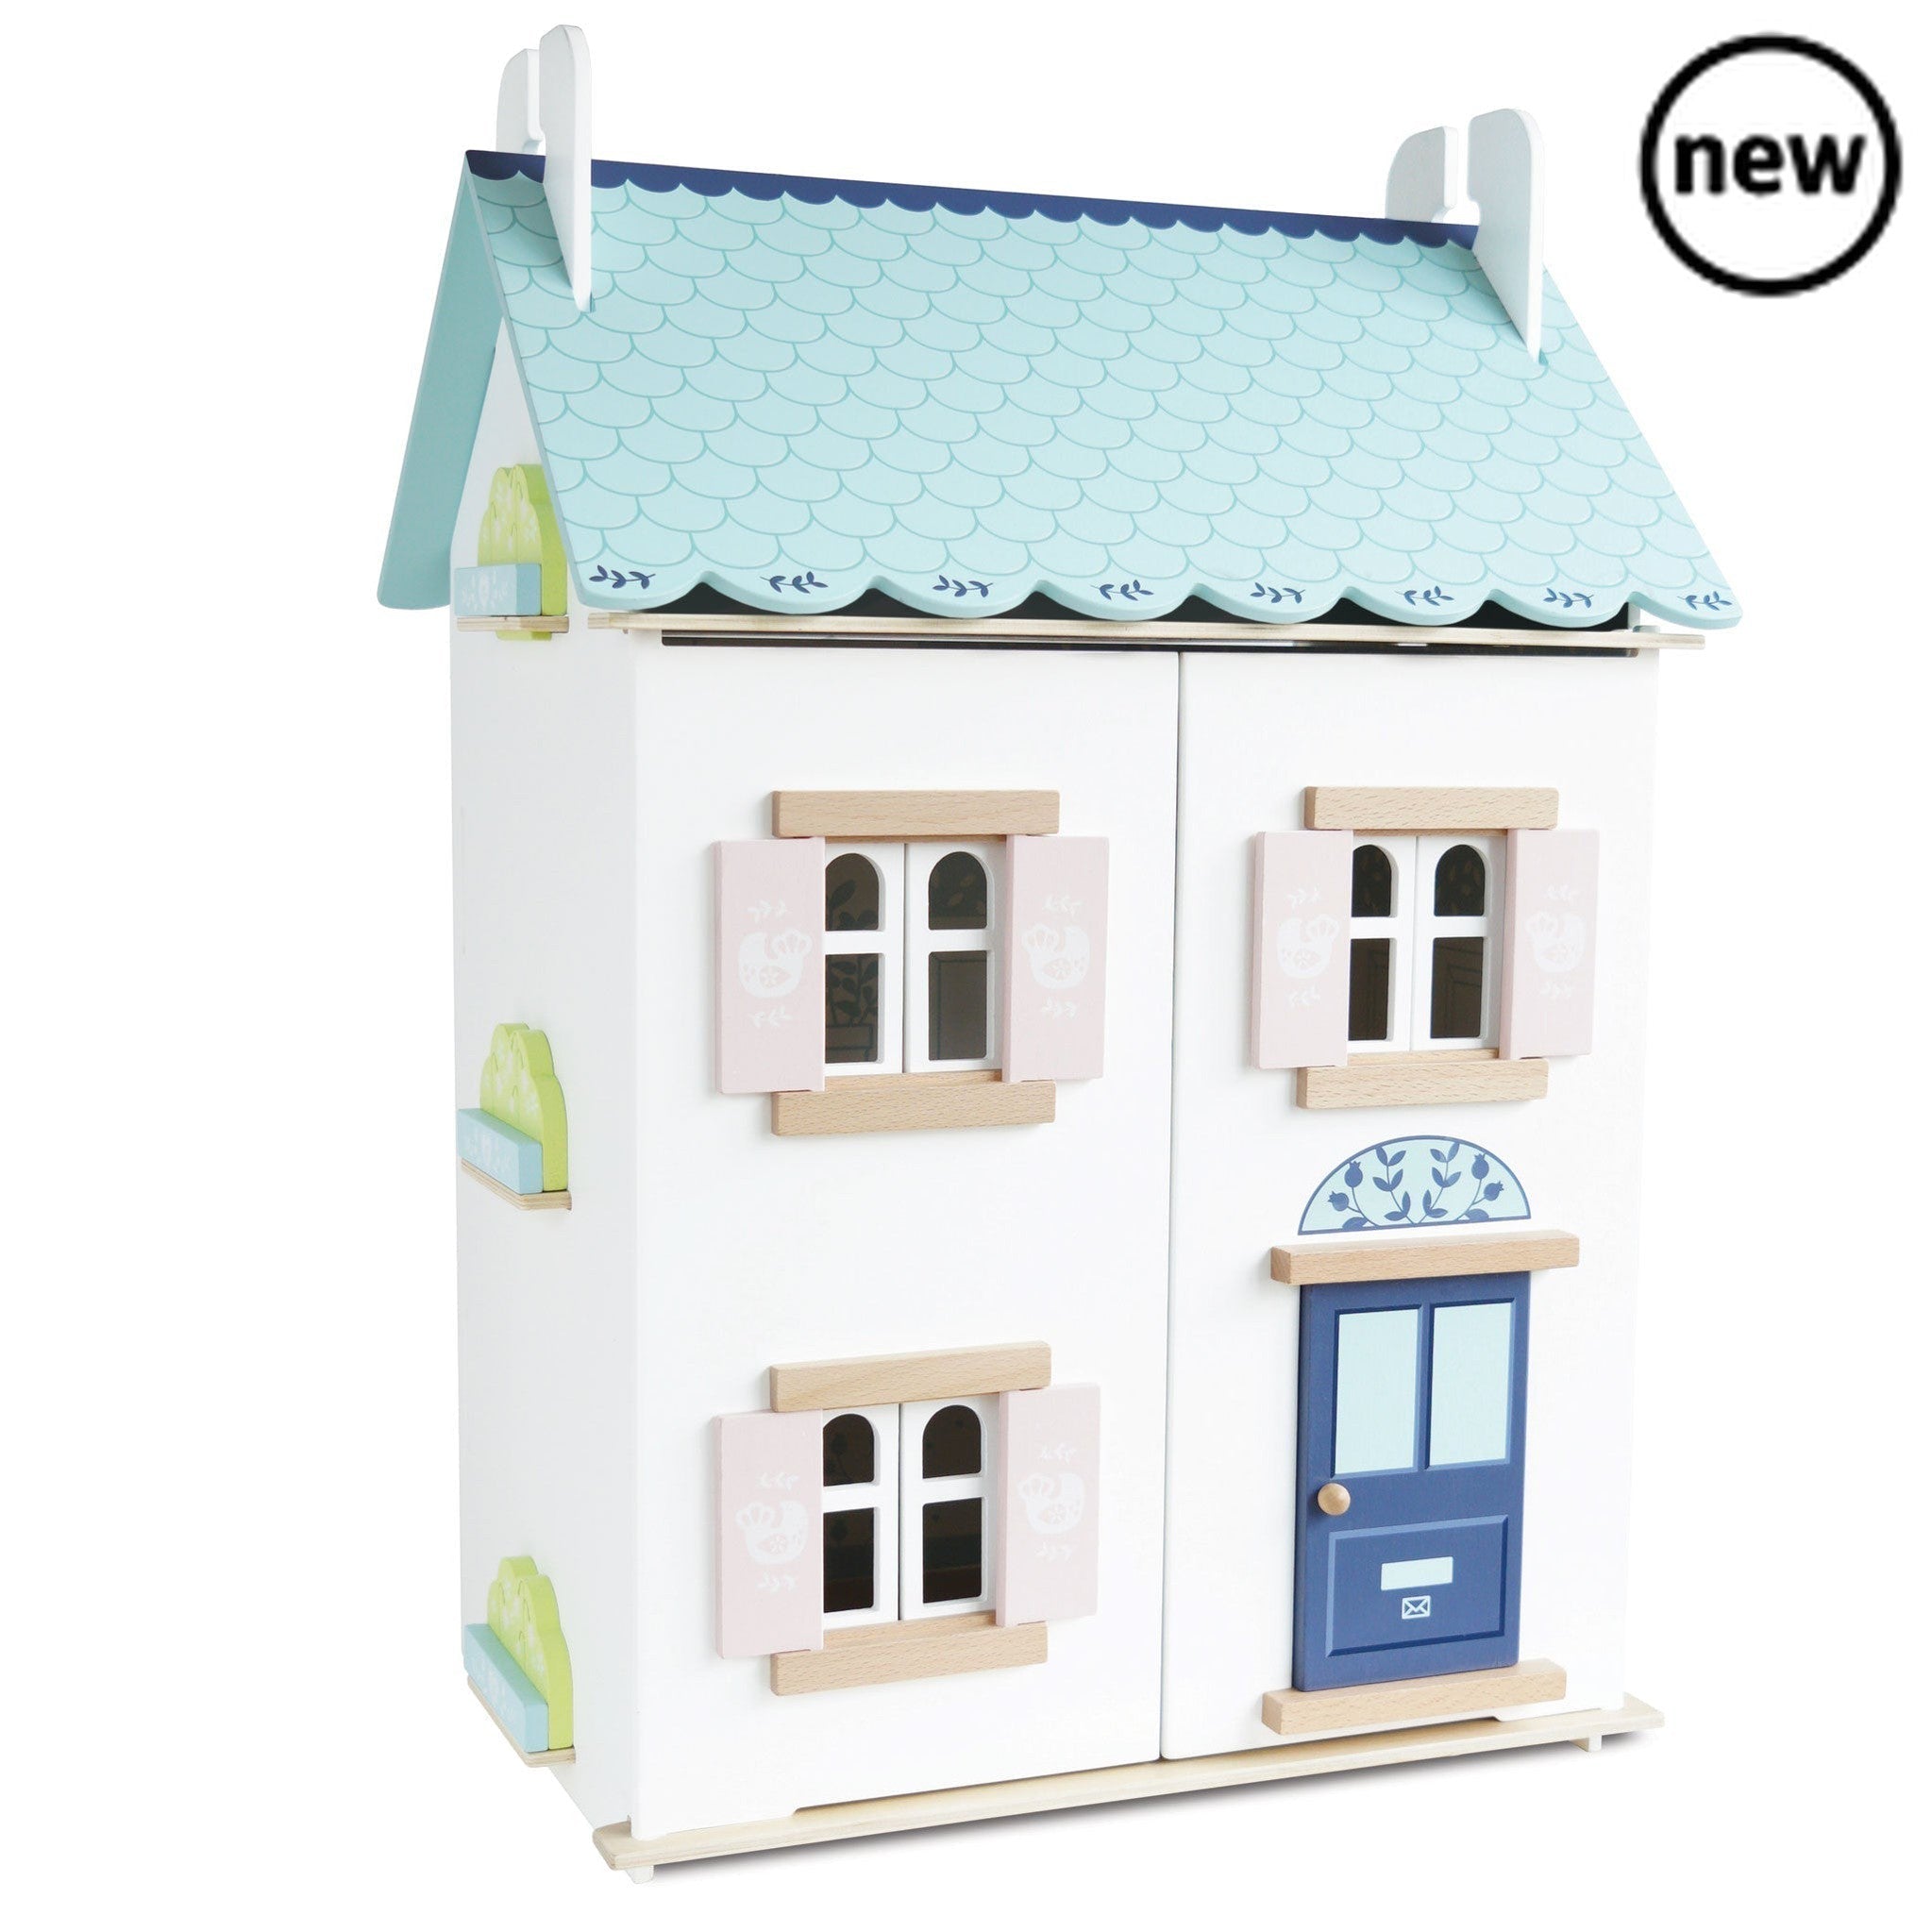 Blue Belle House, Description What a stunner! Welcome to Blue Belle Cottage. This beautiful dolls house is sure to be an instant favourite. Fully painted and decorated in the prettiest pastel shades, using soft blues, pinks and white, this delightful toy house is set across three storeys and is just waiting to be discovered. A welcoming home for any new guests, little ones will adore the many exciting features. Open the front to reveal a wonderful world of make believe. With wooden opening windows and shutt